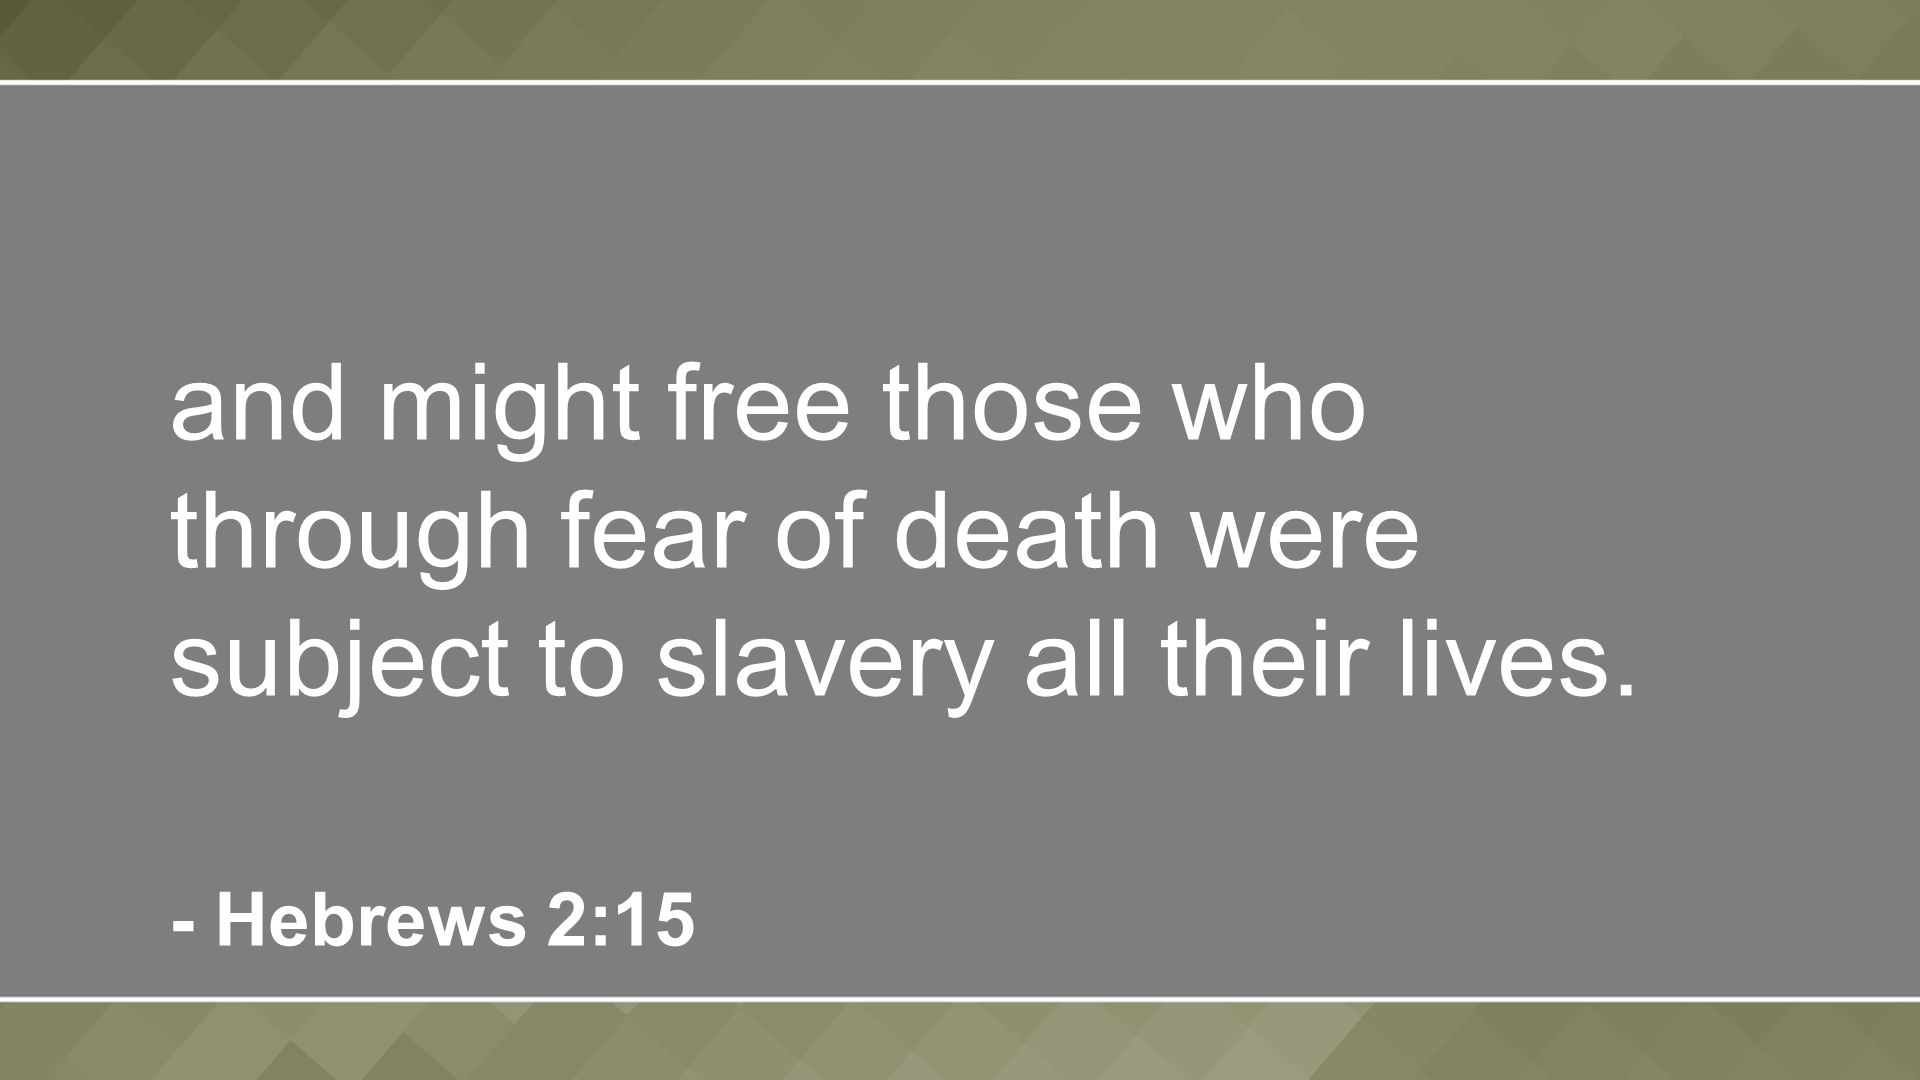 and might free those who through fear of death were subject to slavery all their lives.